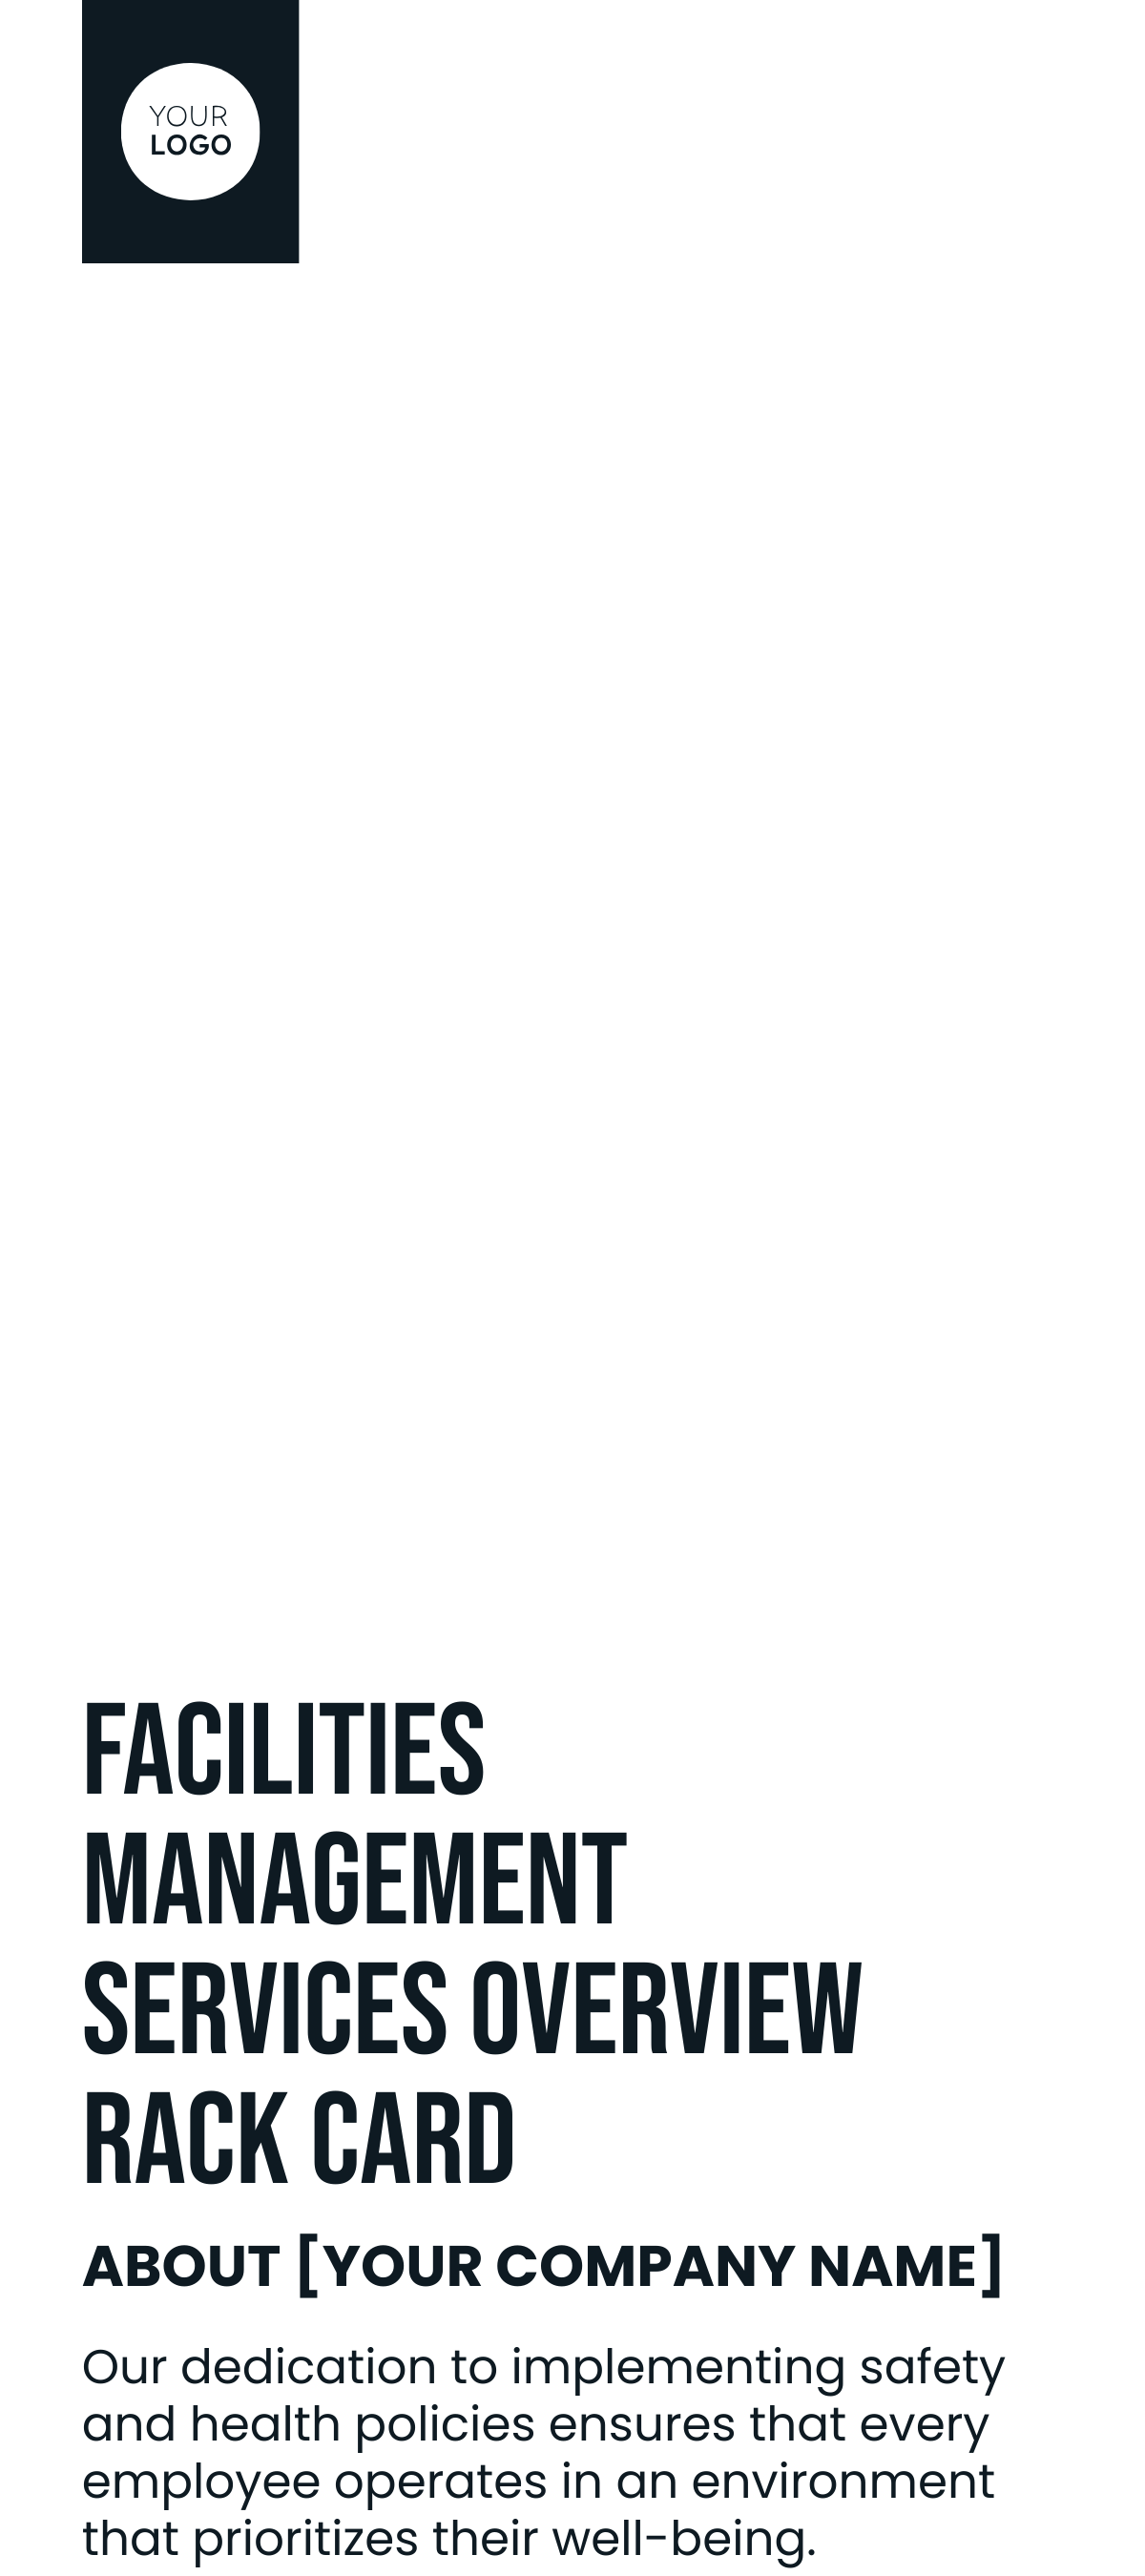 Free Facilities Management Services Overview Rack Card Template